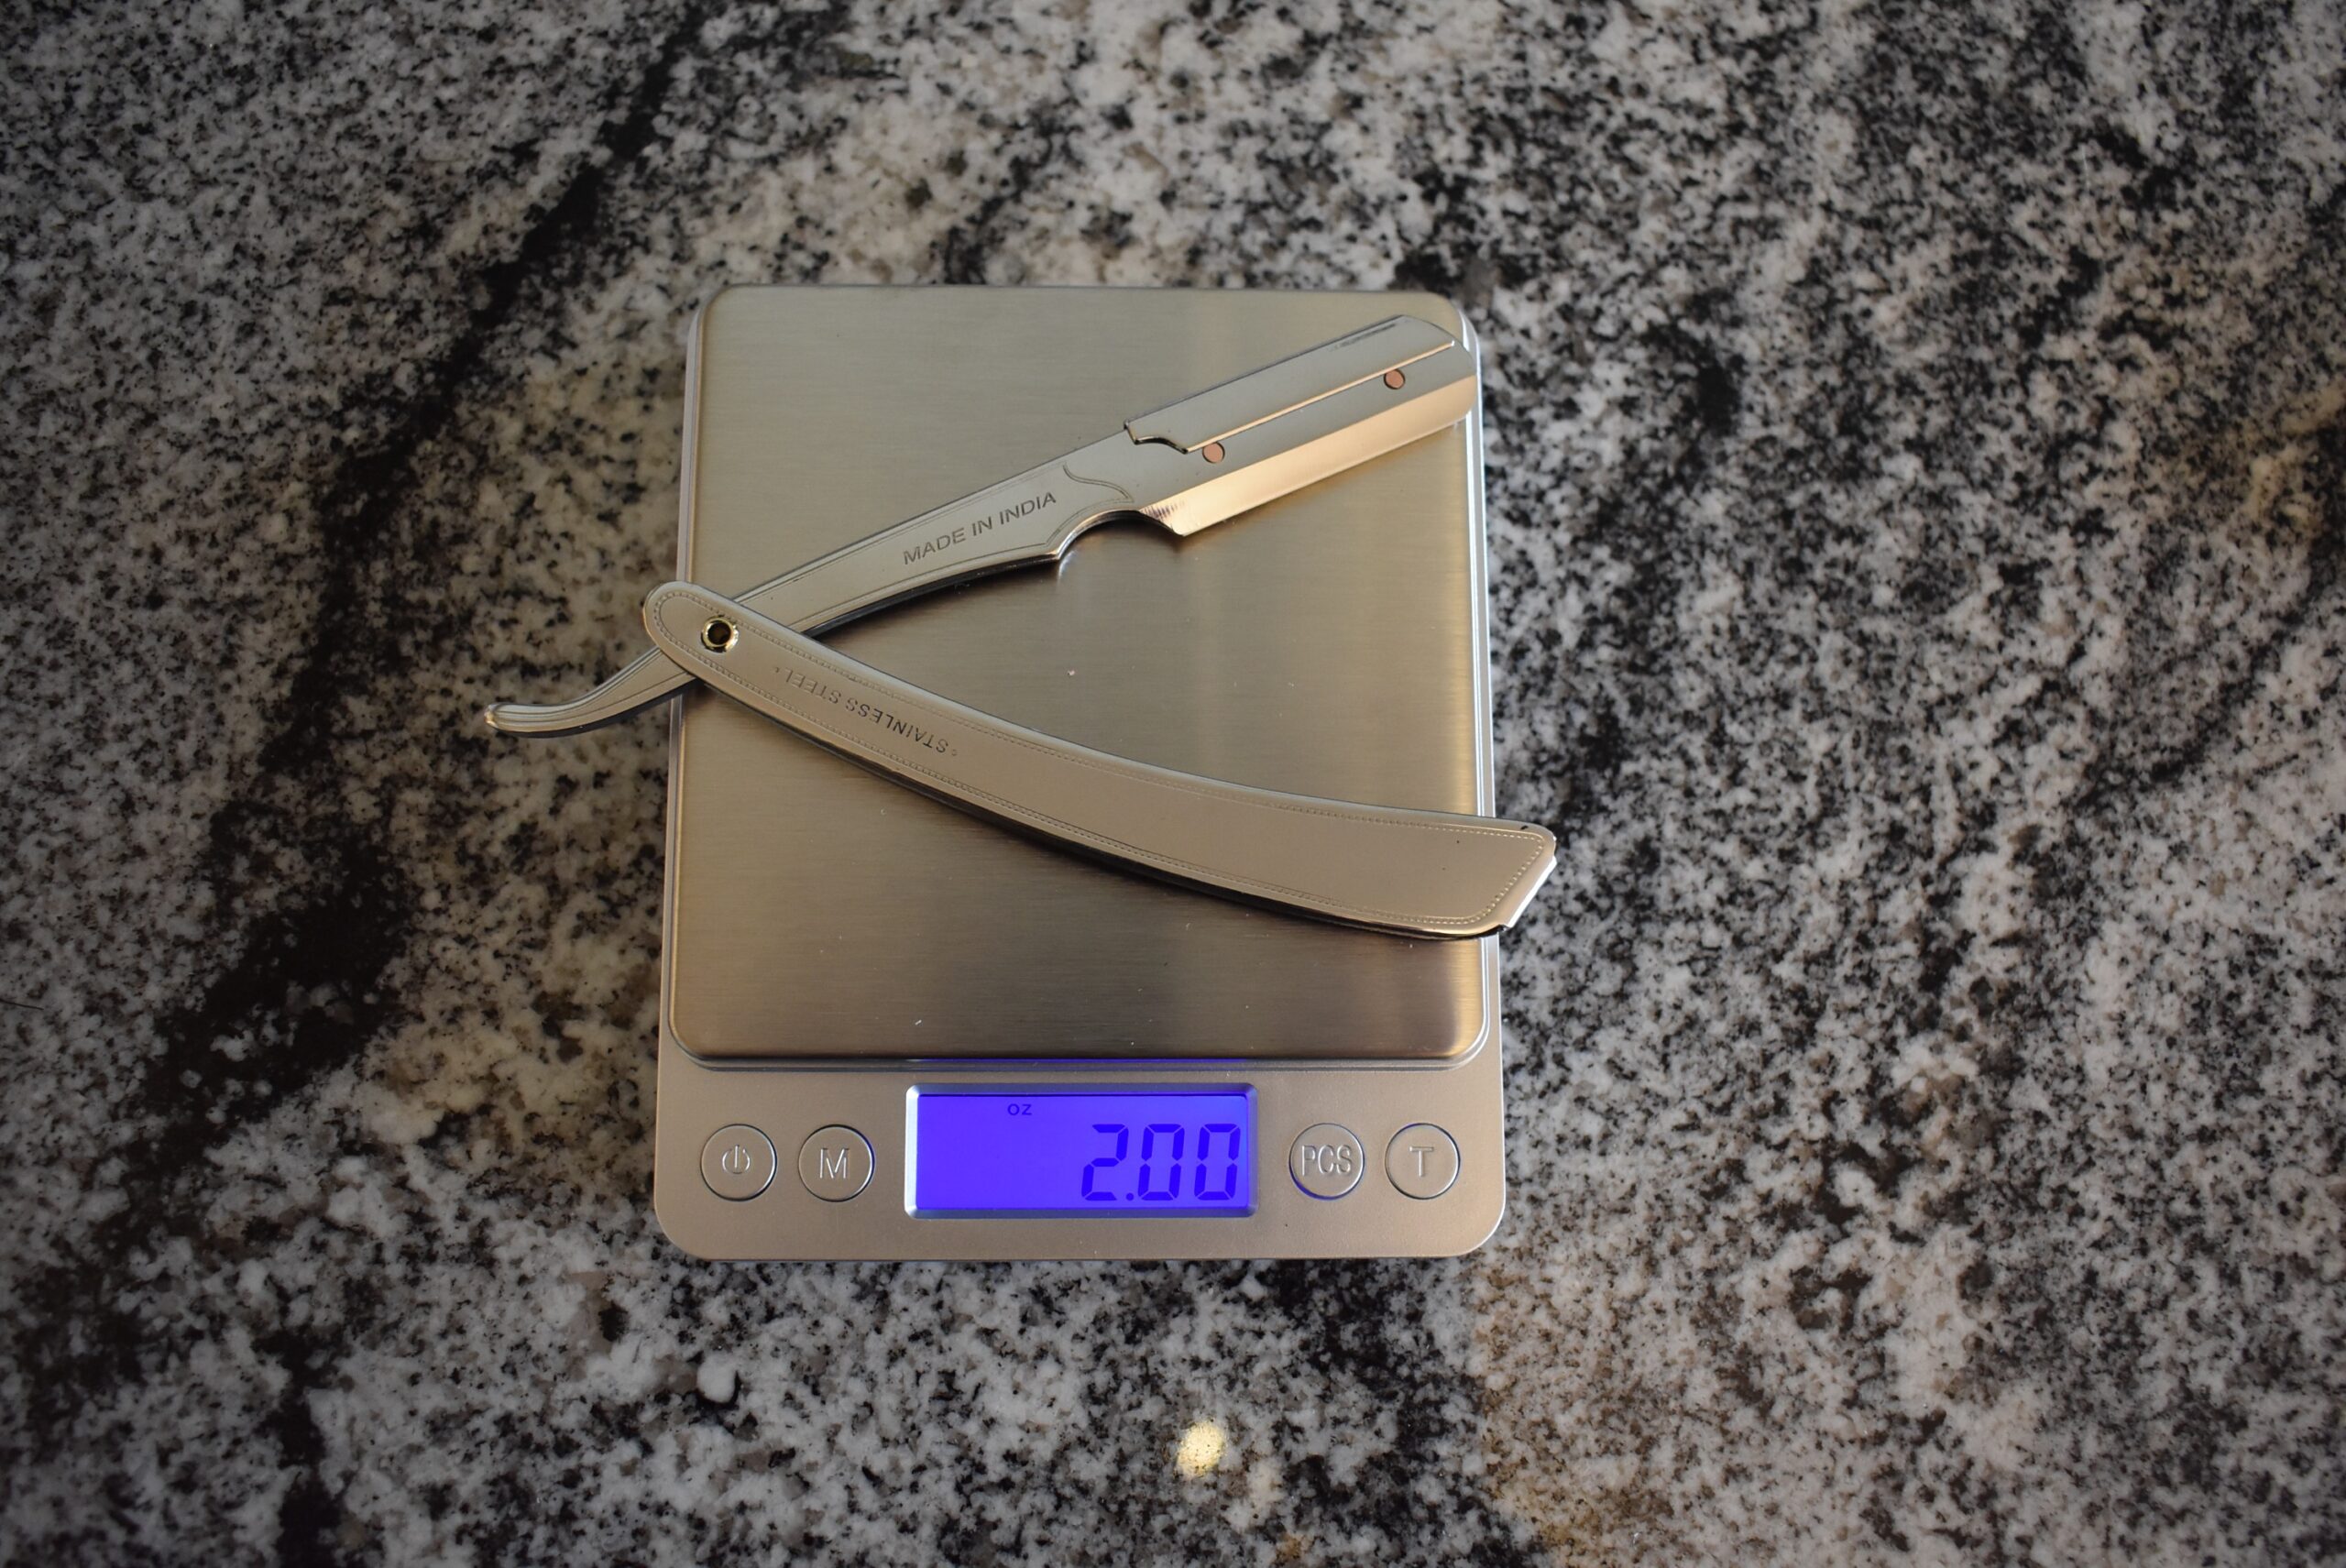 Parker straight razor slightly open and sitting on a scale registering 2.00 oz